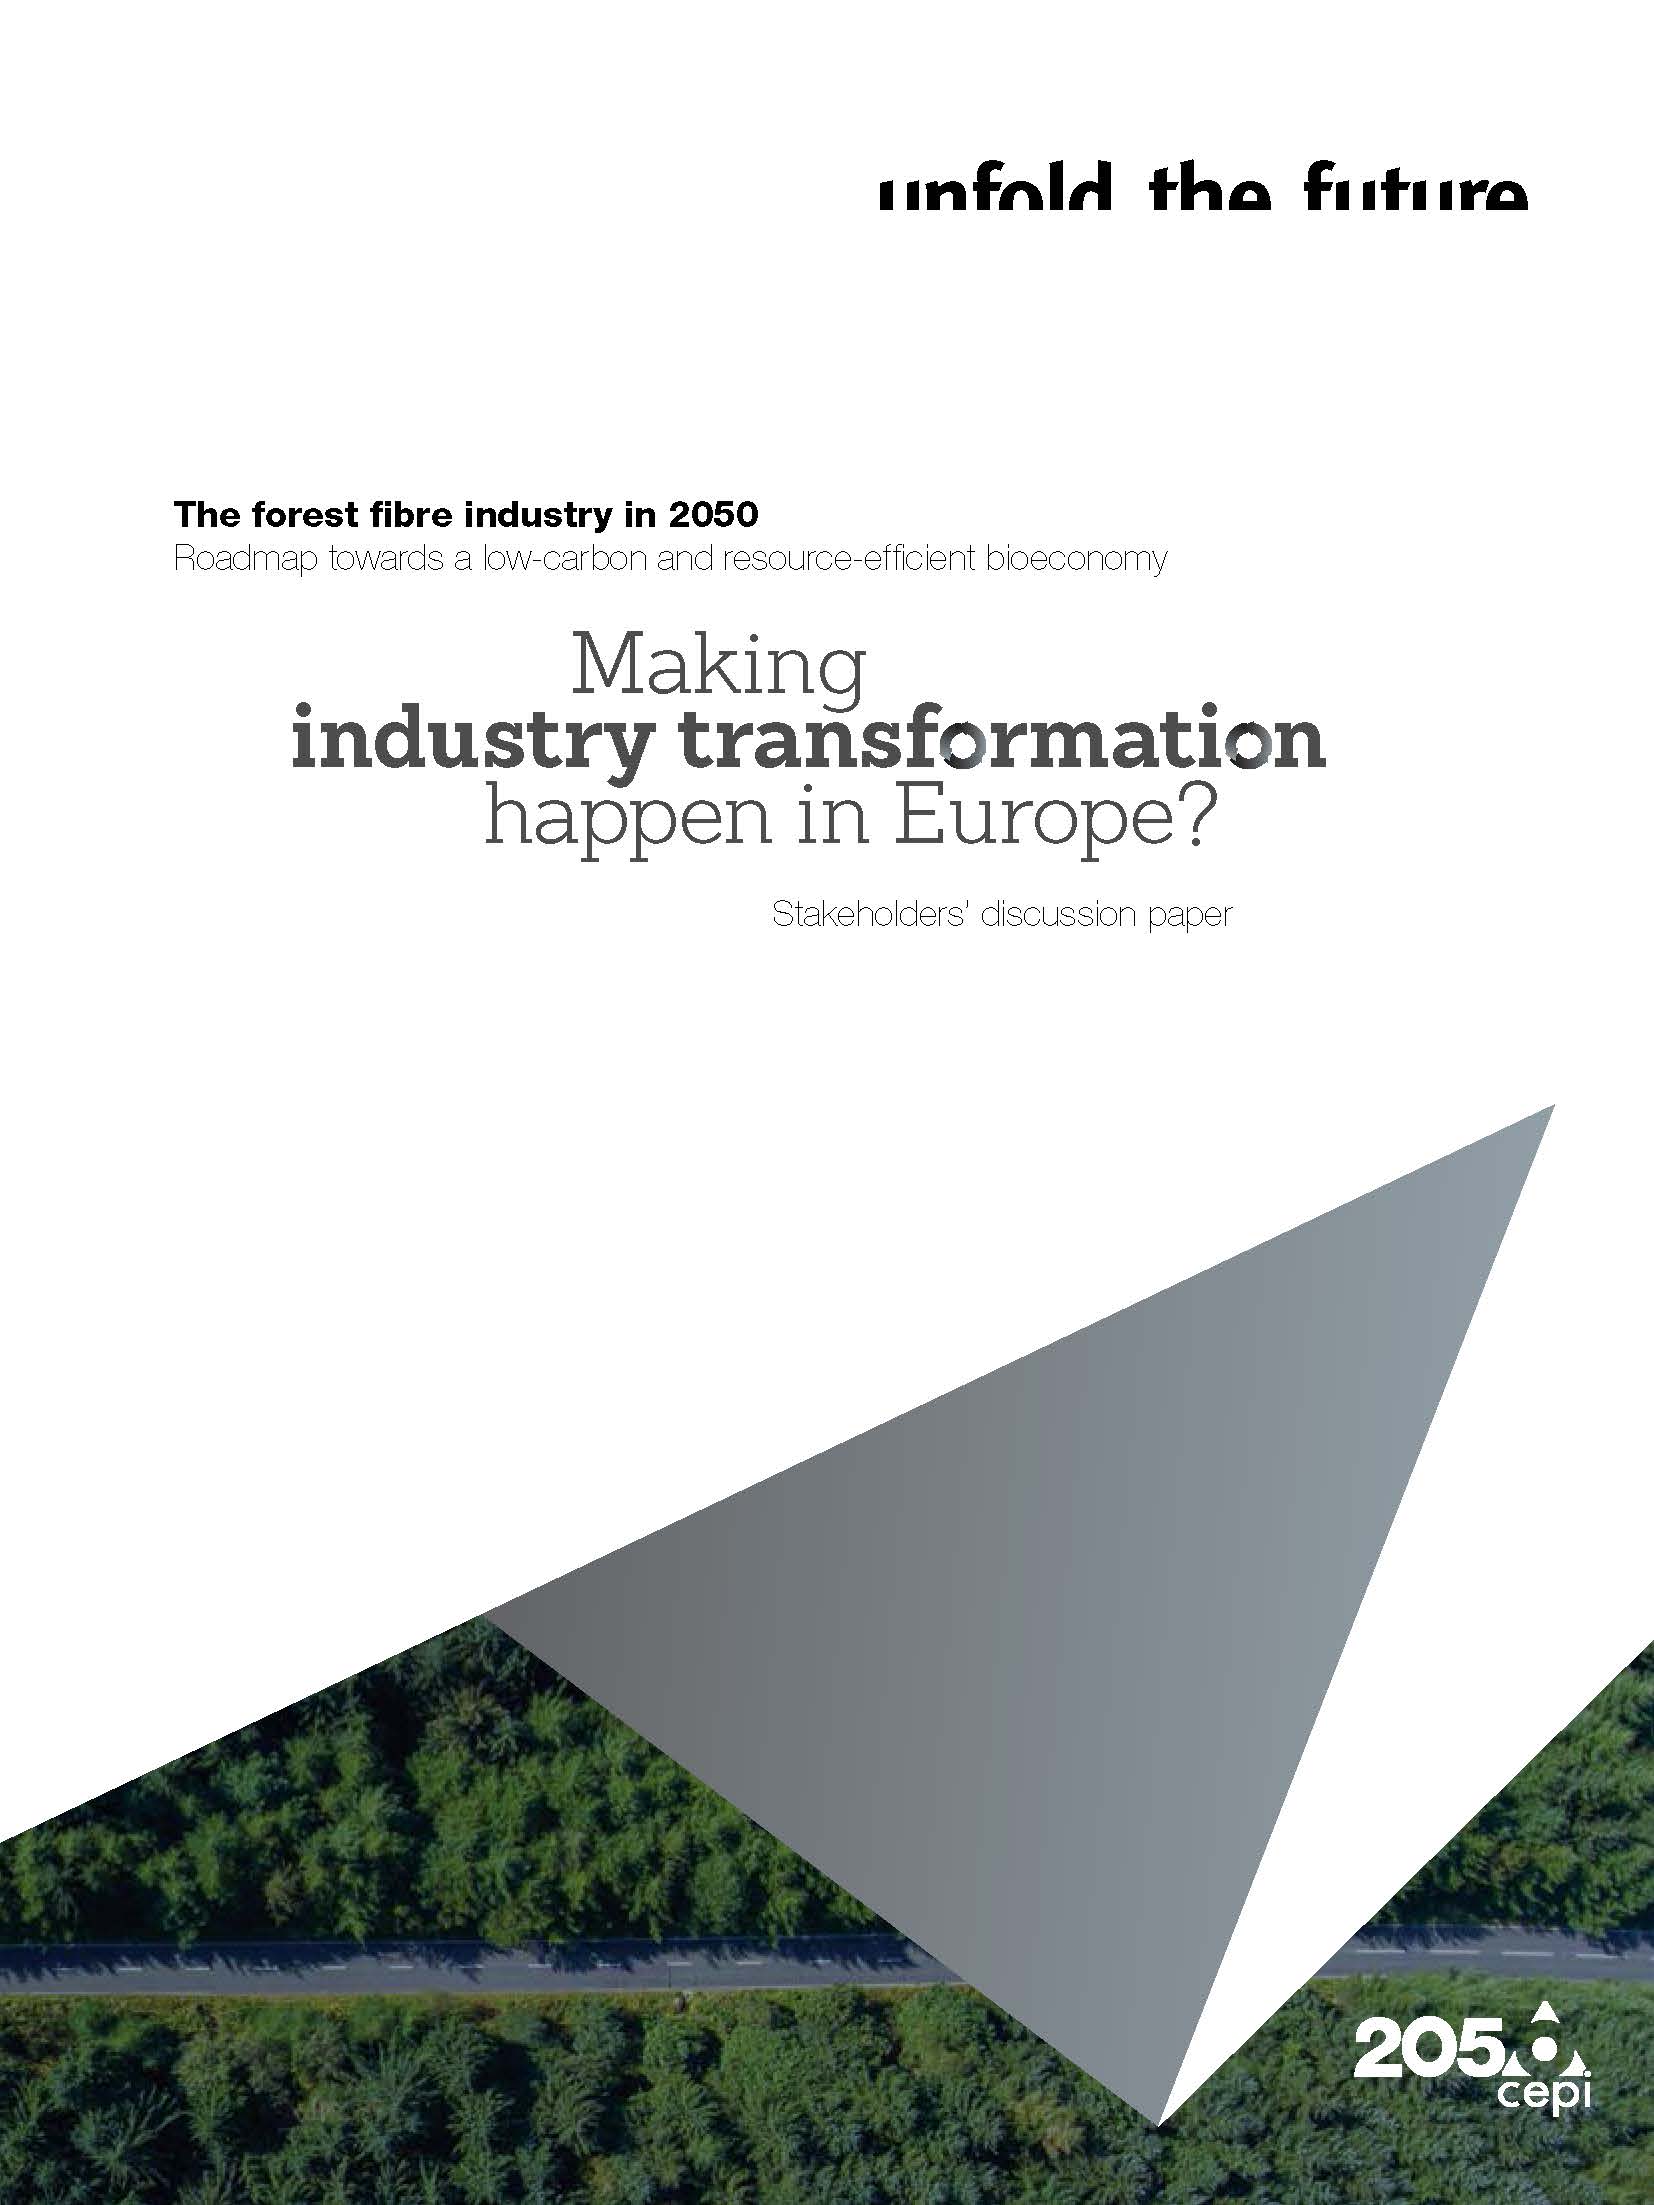 European paper industry unveils major investment agenda to drive towards its 2050 vision